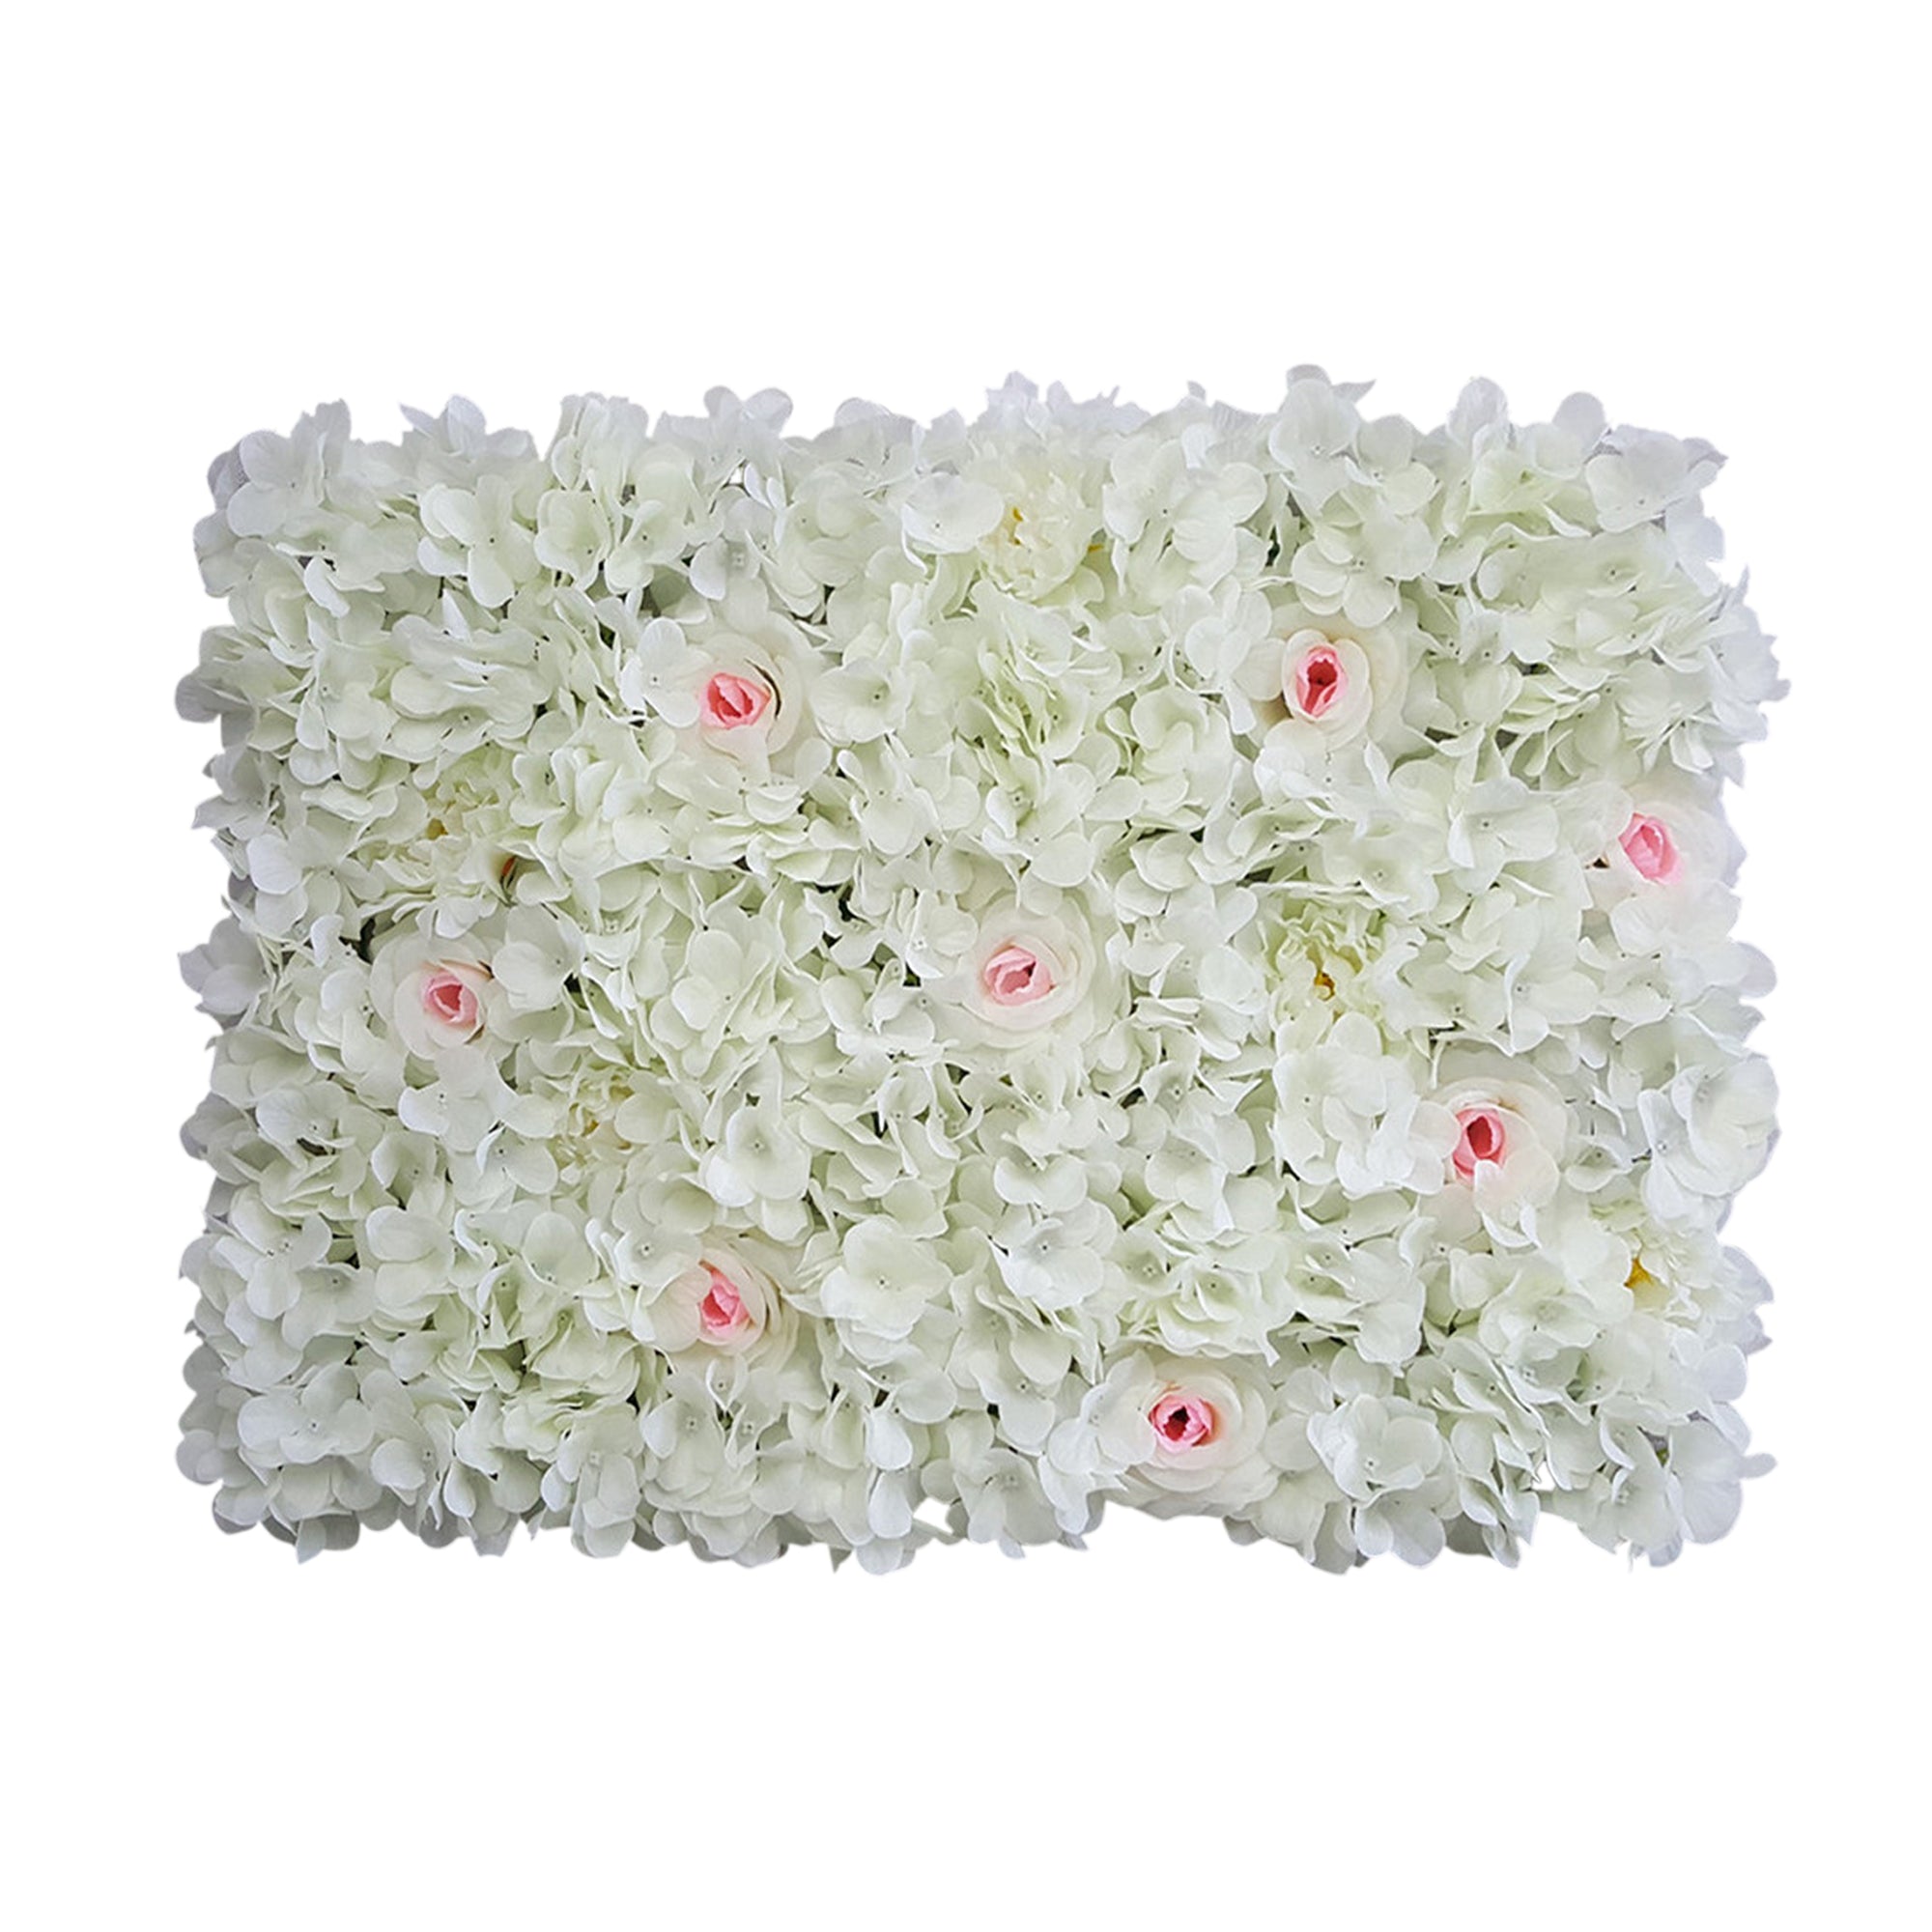 Flower Wall Backdrops Silk Flowers Wall Background for Wedding Photography